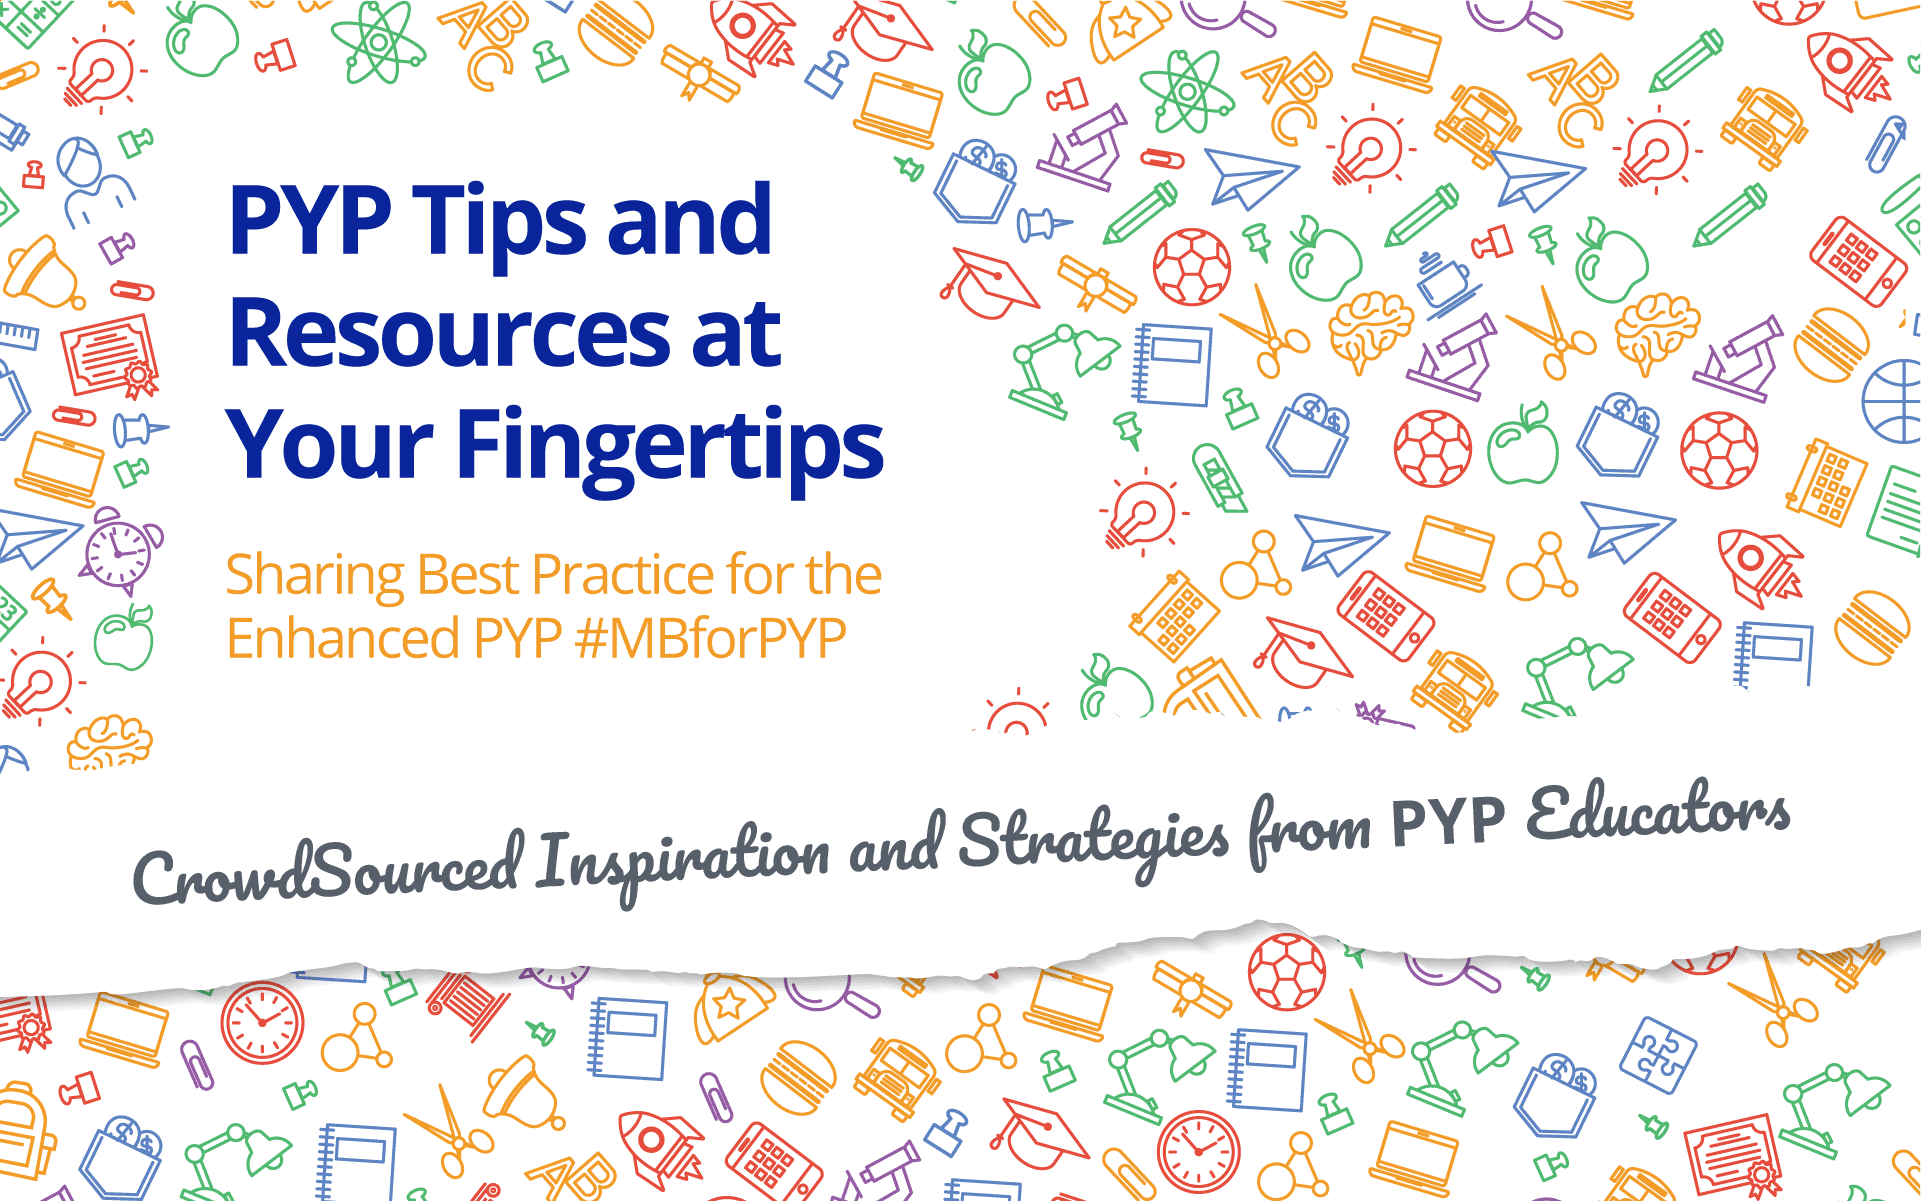 PYP Tips and Resources at Your Fingertips